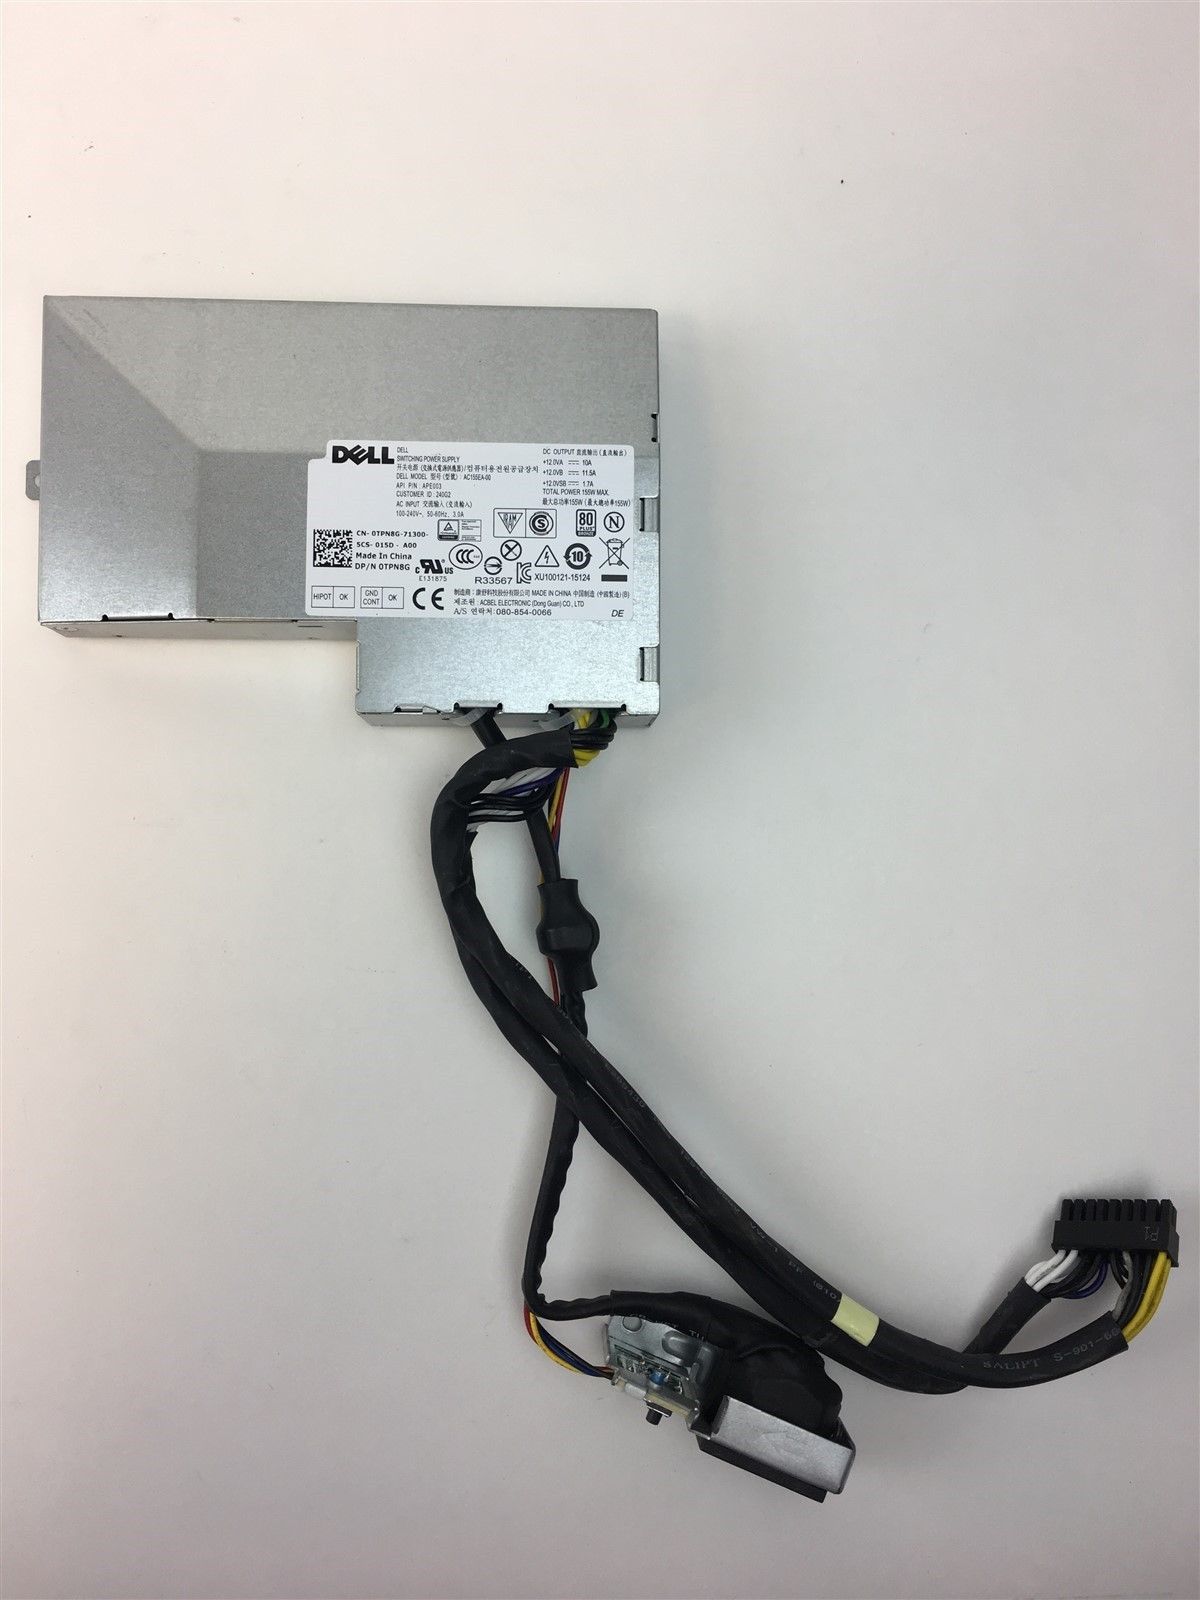 OEM Dell Optiplex 22 3240 3440 7440 All-In-One 155W Power Supply H155EA-00 143FN 